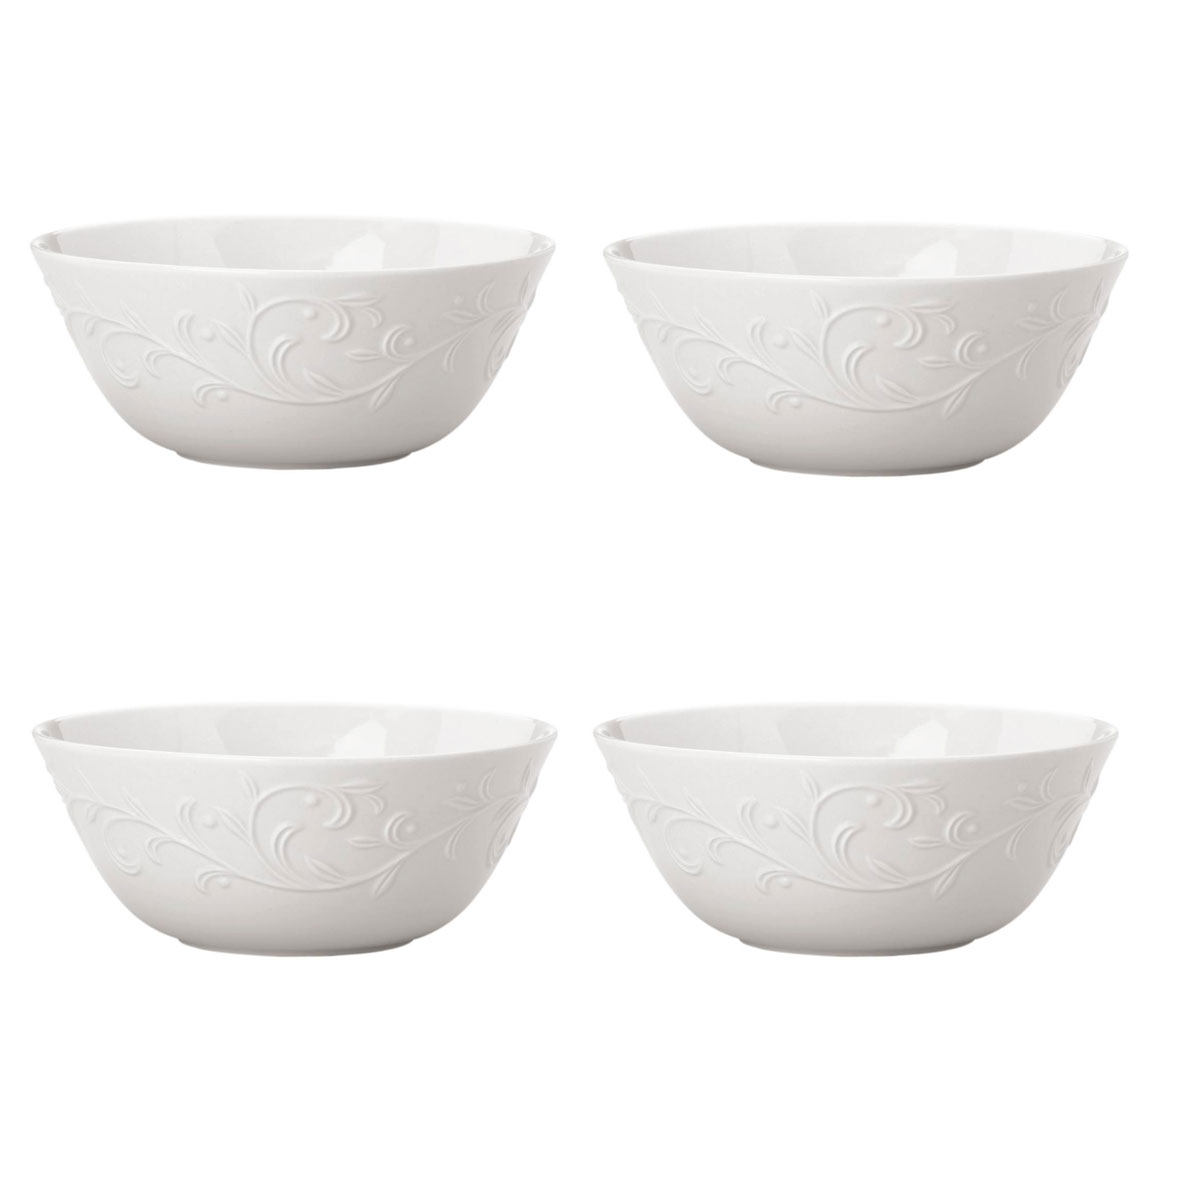 Lenox Opal Innocence Carved China All Purpose Bowls, Set of 4